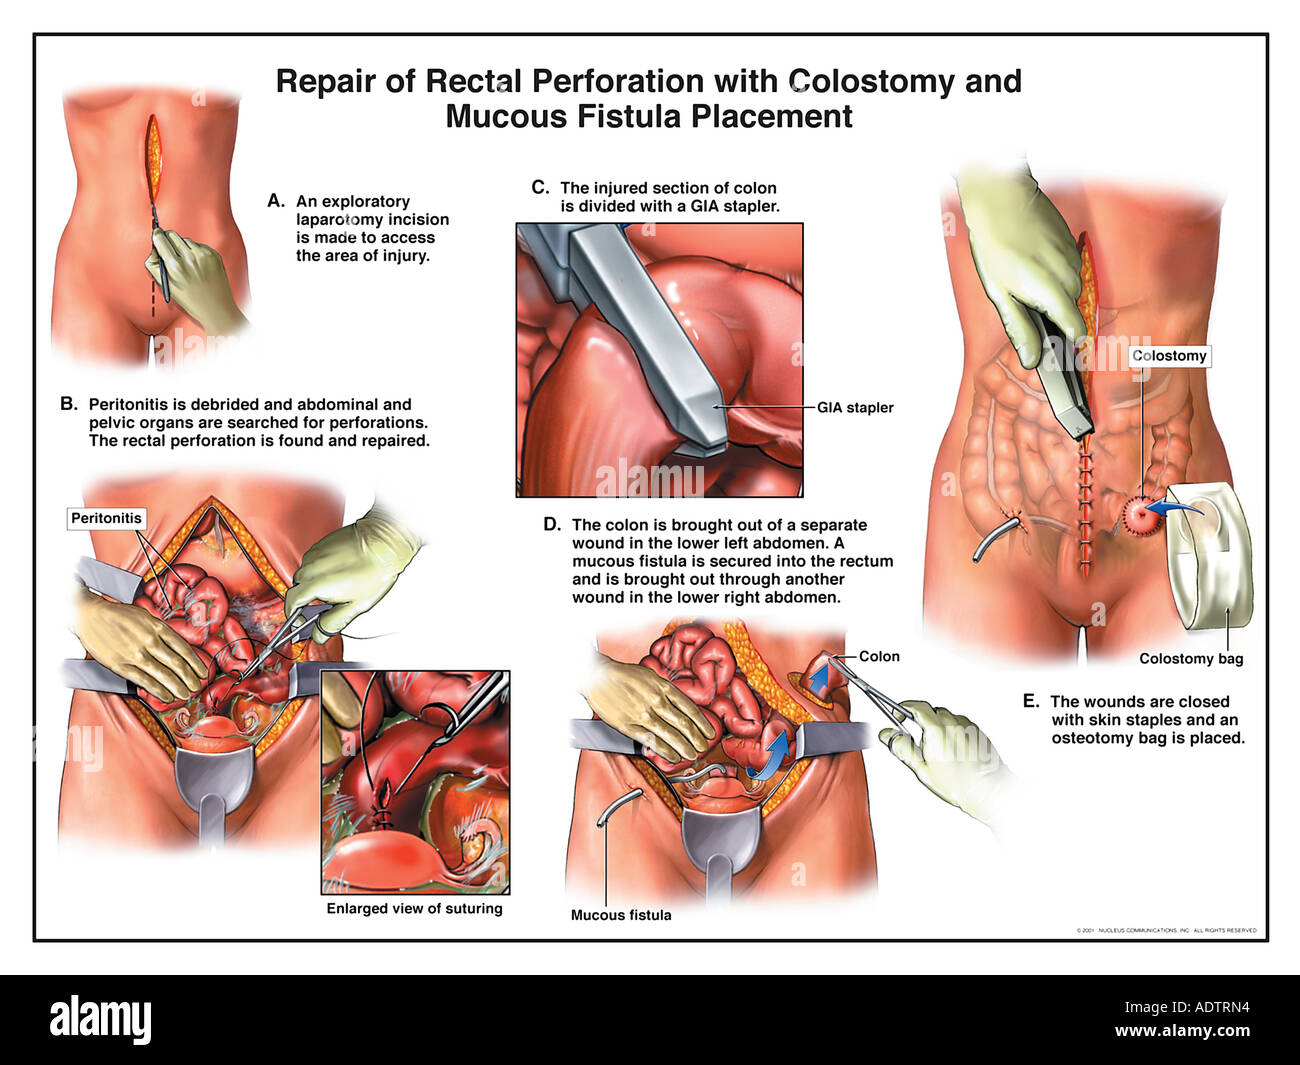 Repair of Rectal Perforation with Colostomy and Mucous Fistula Placement Stock Photo